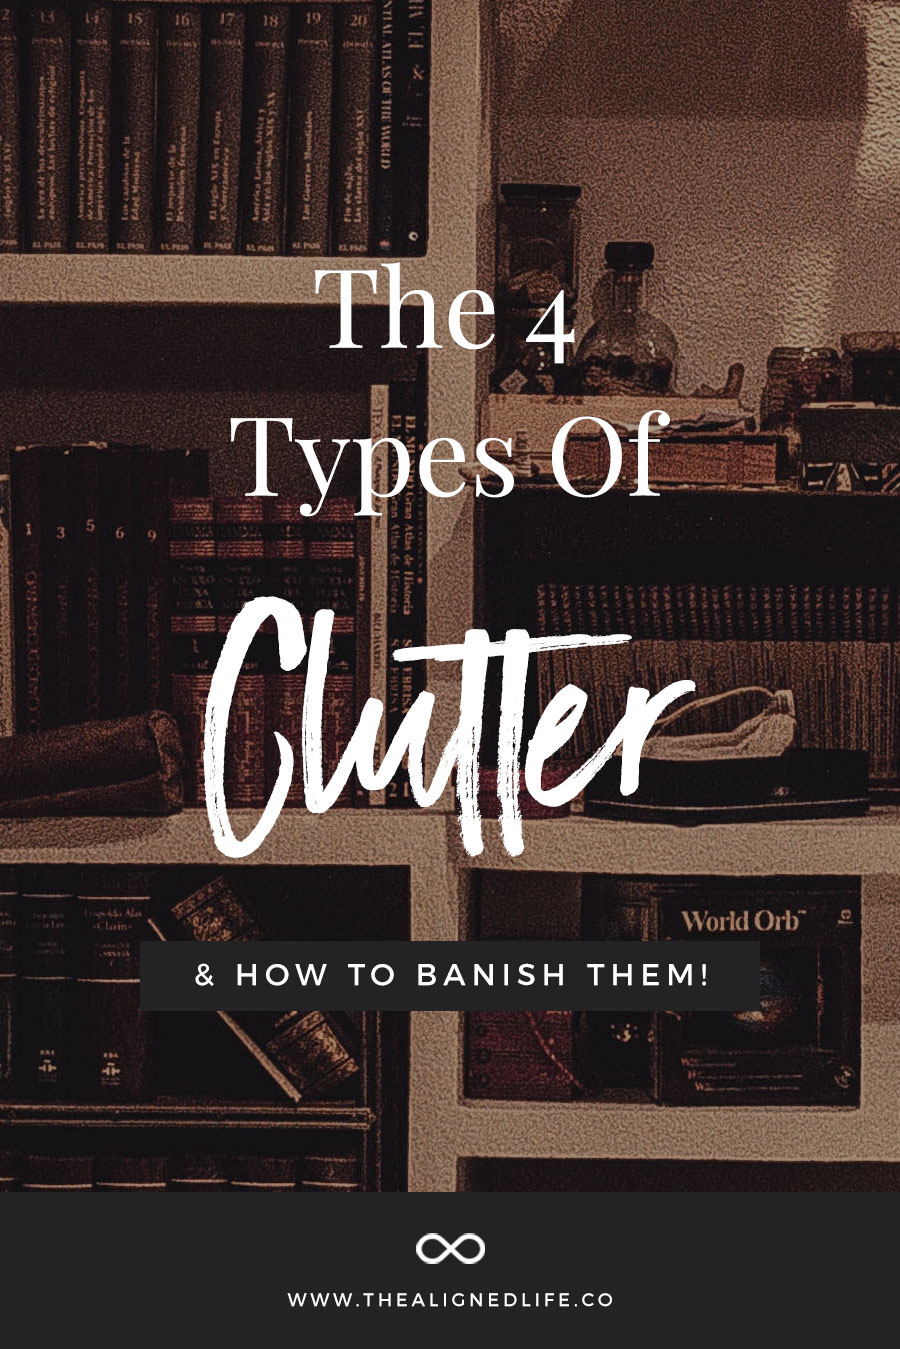 The 4 Types of Clutter & How To Banish Them